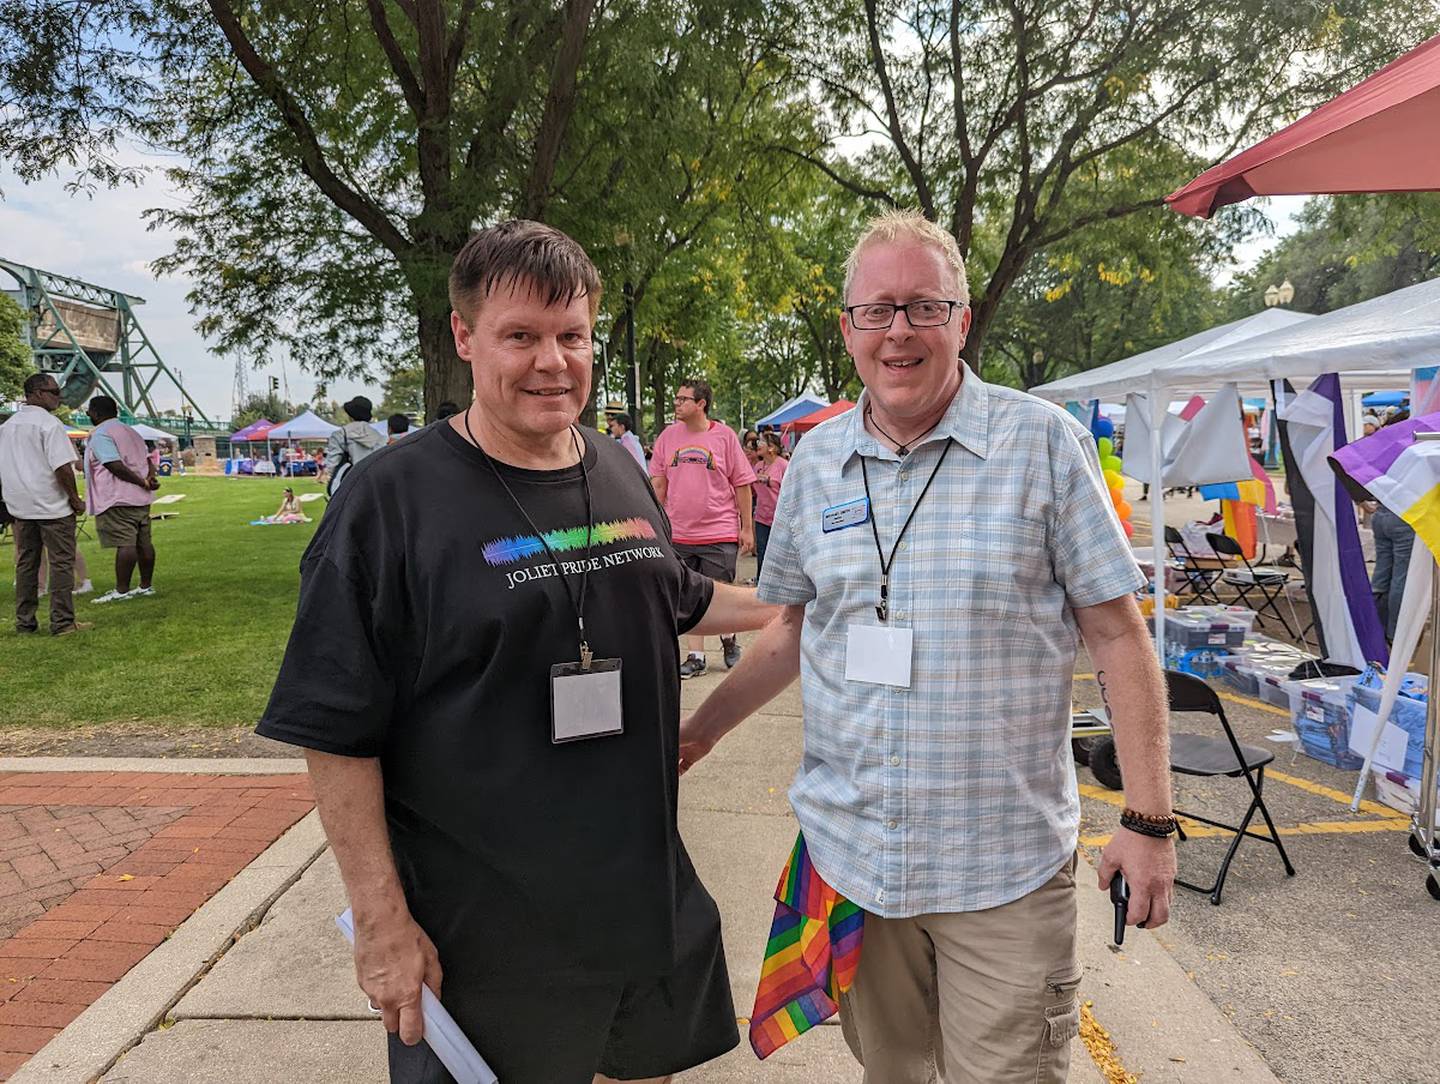 Jeff Gregory, president of the Joliet Pride Network, poses for a photo with Michael Smith, vice president of the Joliet Pride Network. The Joliet Pride Network held its third Joliet PrideFest event on Saturday, Sept. 17, 2022, at the Billie Limacher Bicentennial Park and Theatre in Joliet. The family friendly event included an all-age drag show, live music, food, and activities for children and teens.